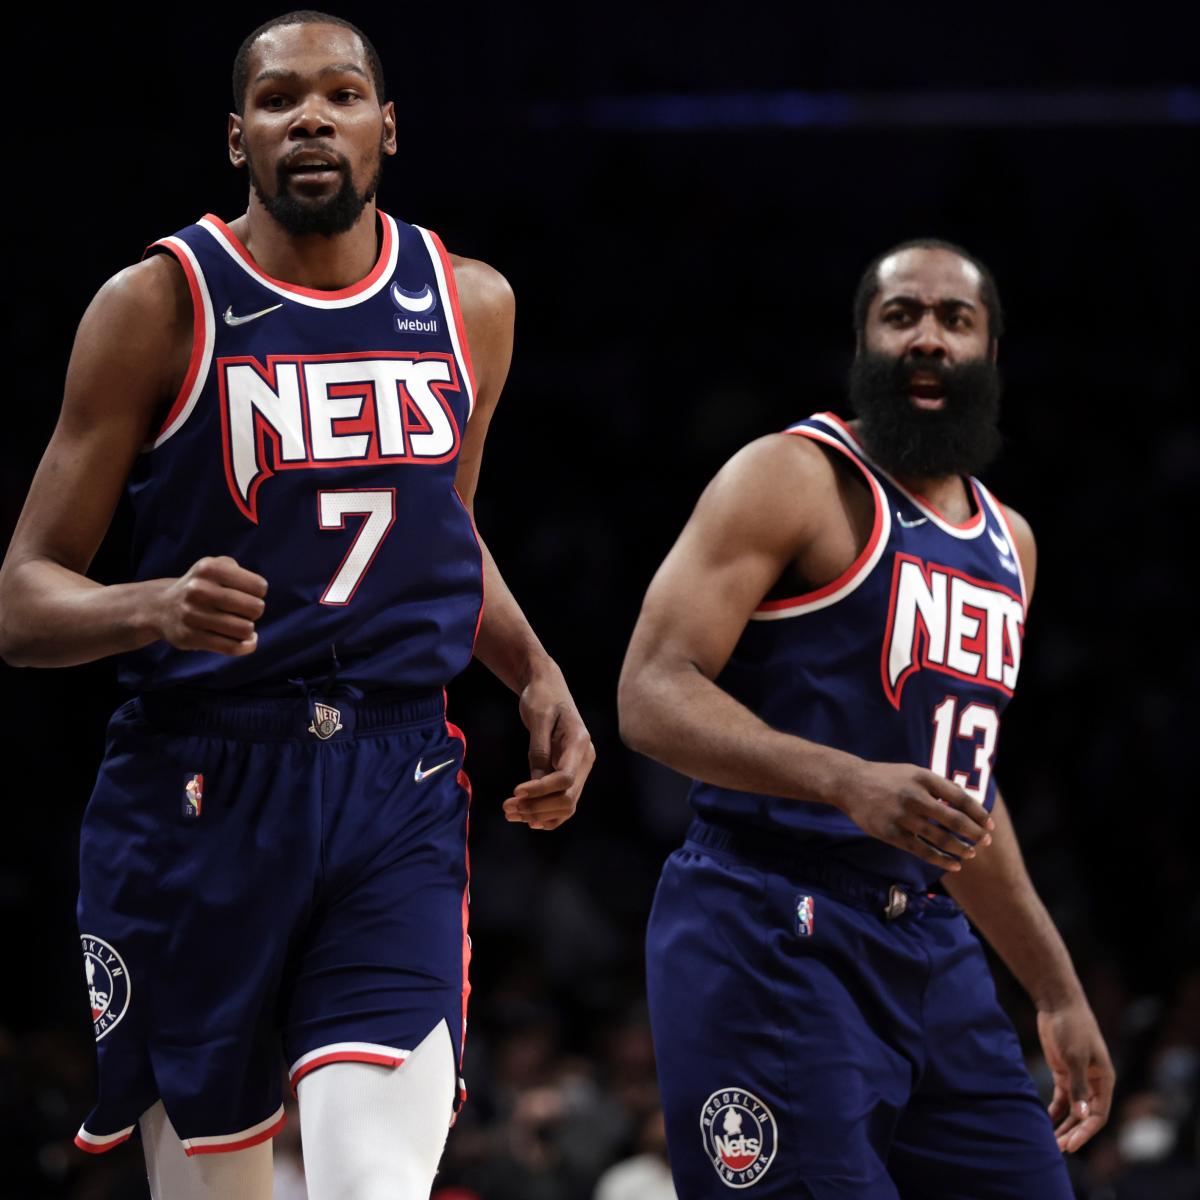 RUMOR: Lakers star LeBron James' true feelings on potential Kevin Durant  trade with Nets, revealed